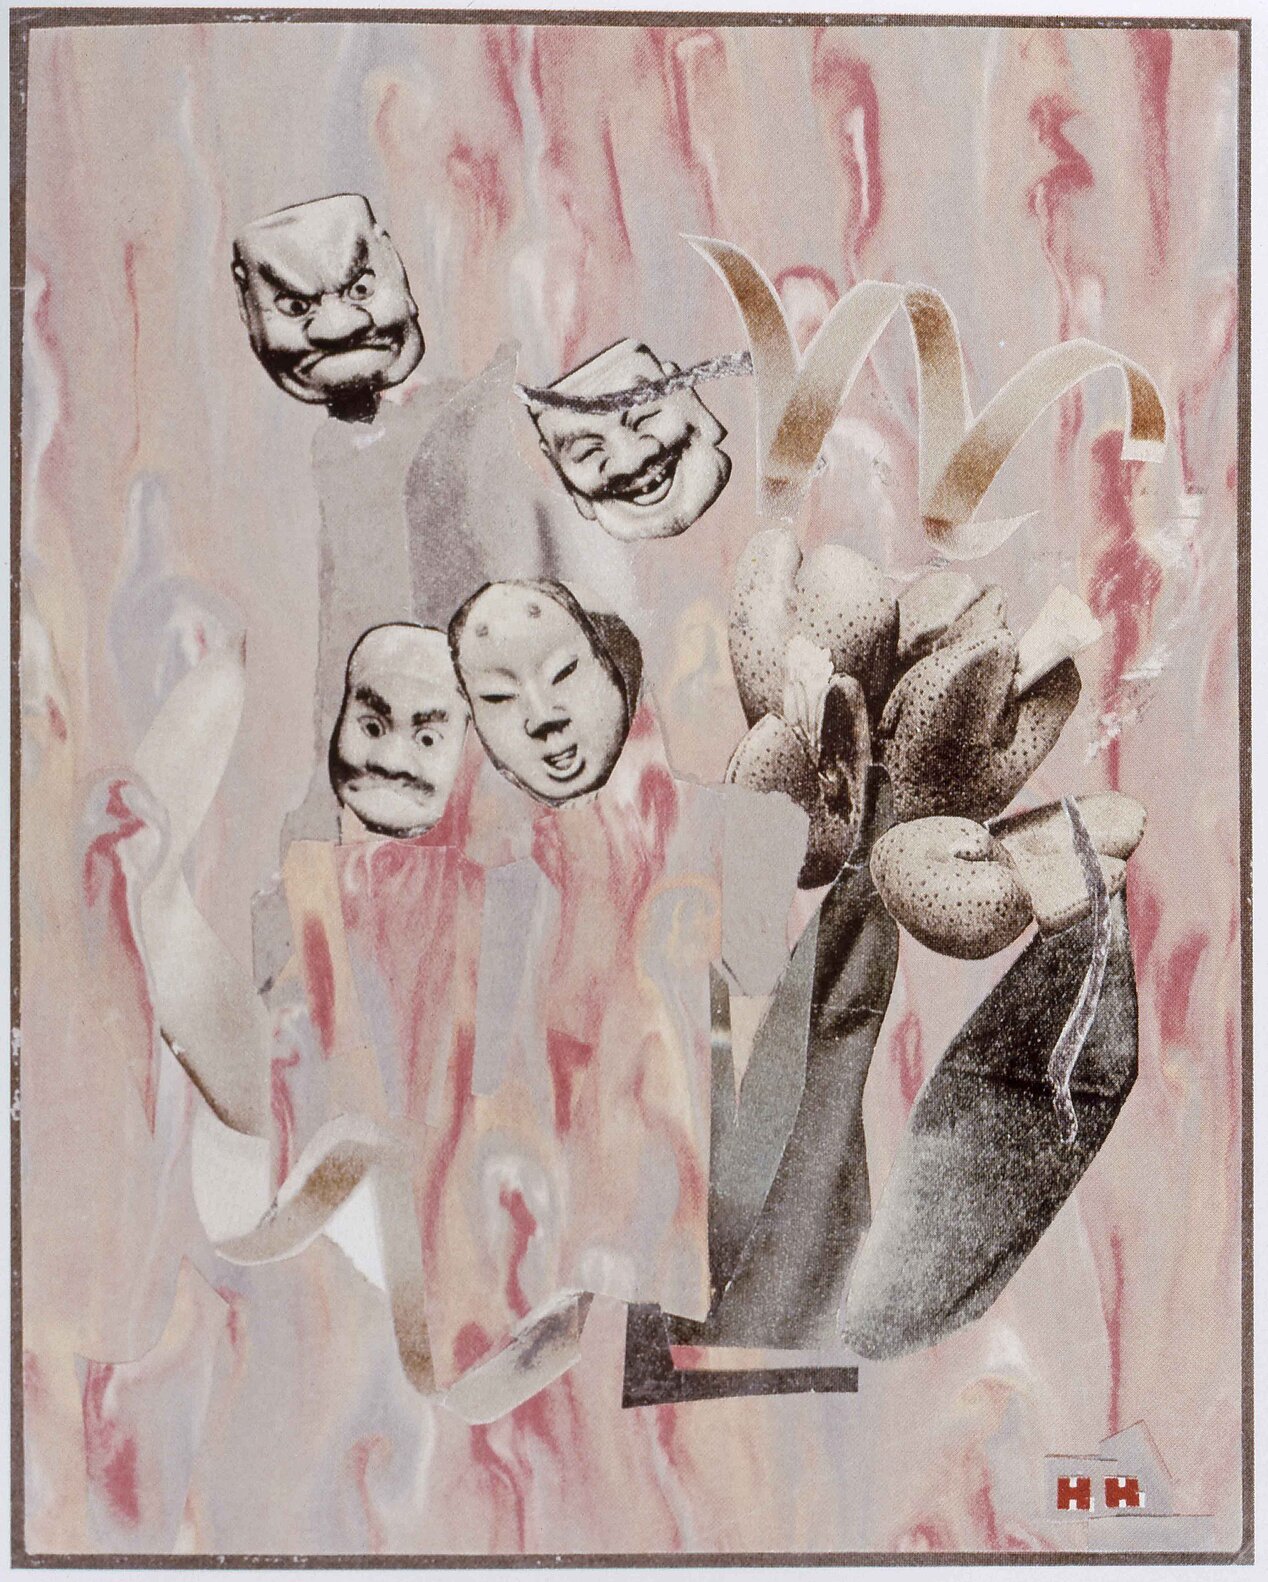 You can see a collage by Hannah Höch. The colors are beige-pink and you can see several masks and a flower.